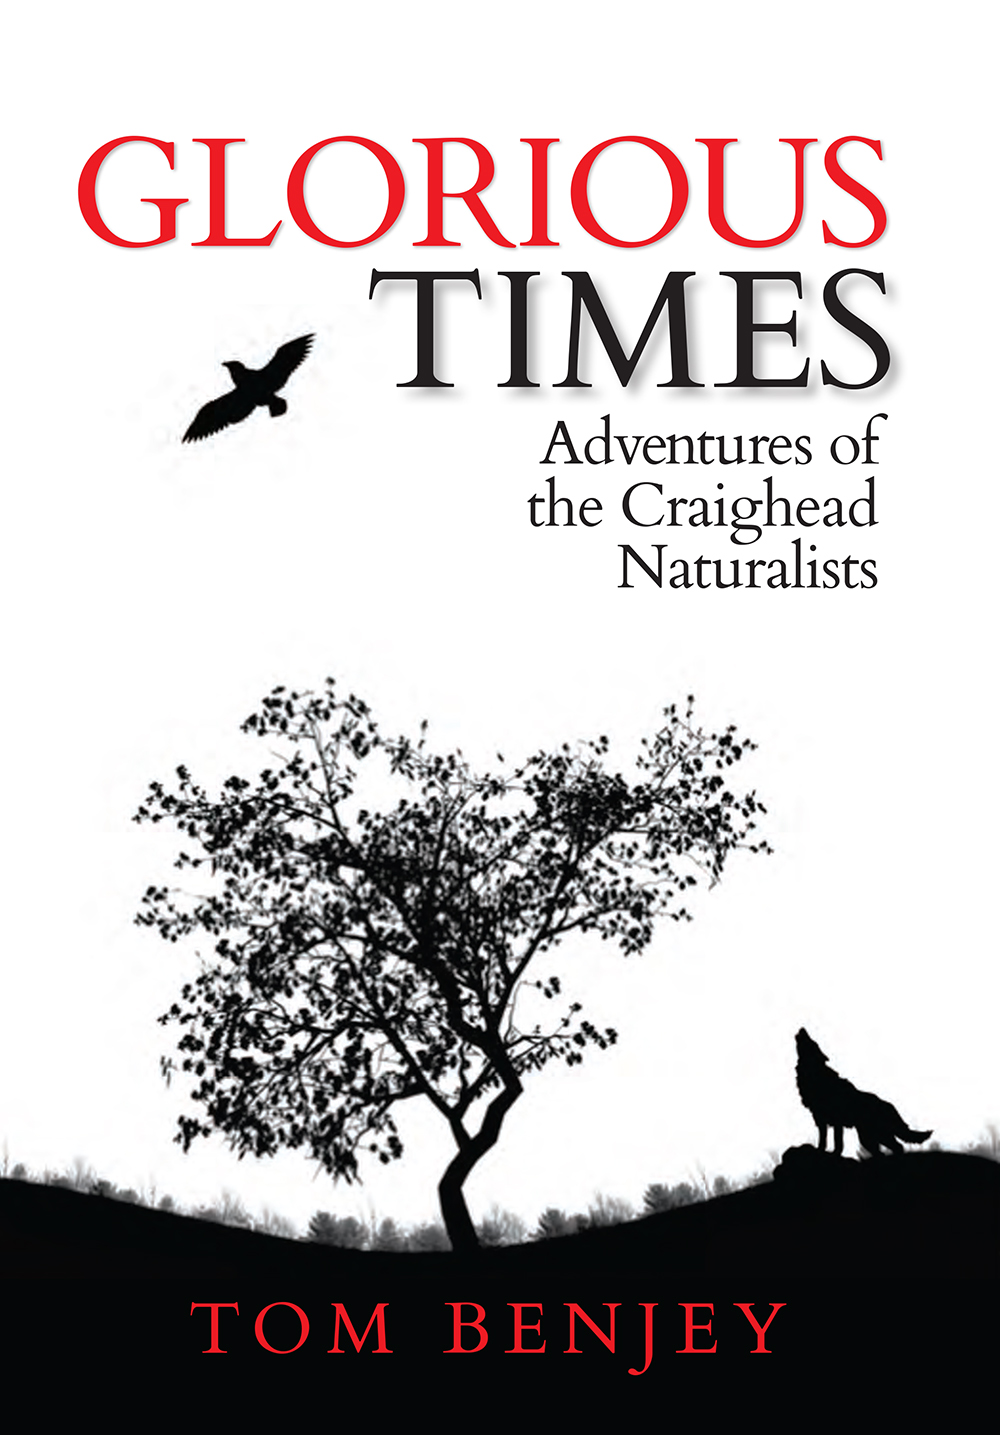 Glorious Times: Adventures of the Craighead Naturalists by Tom Benjey